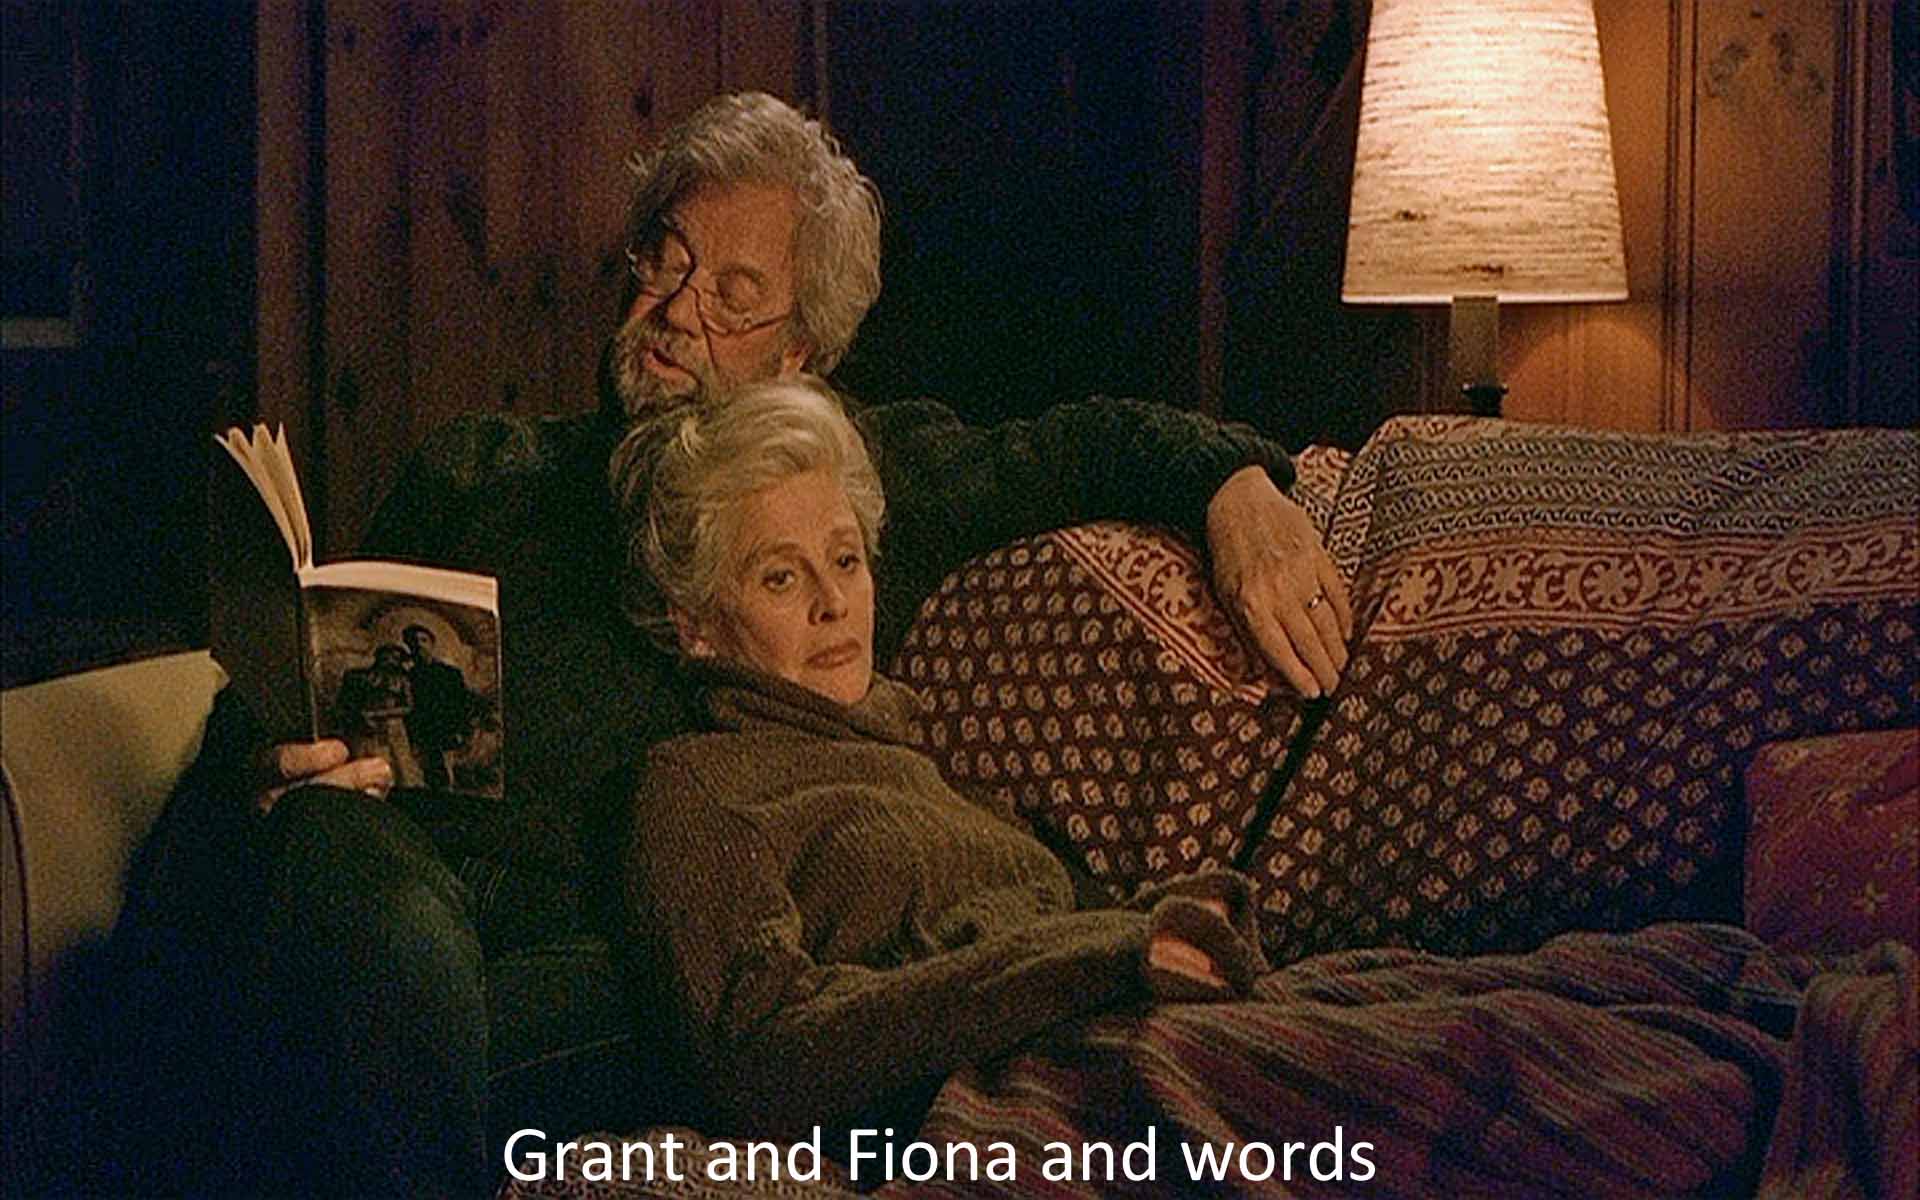 Grant and Fiona and words